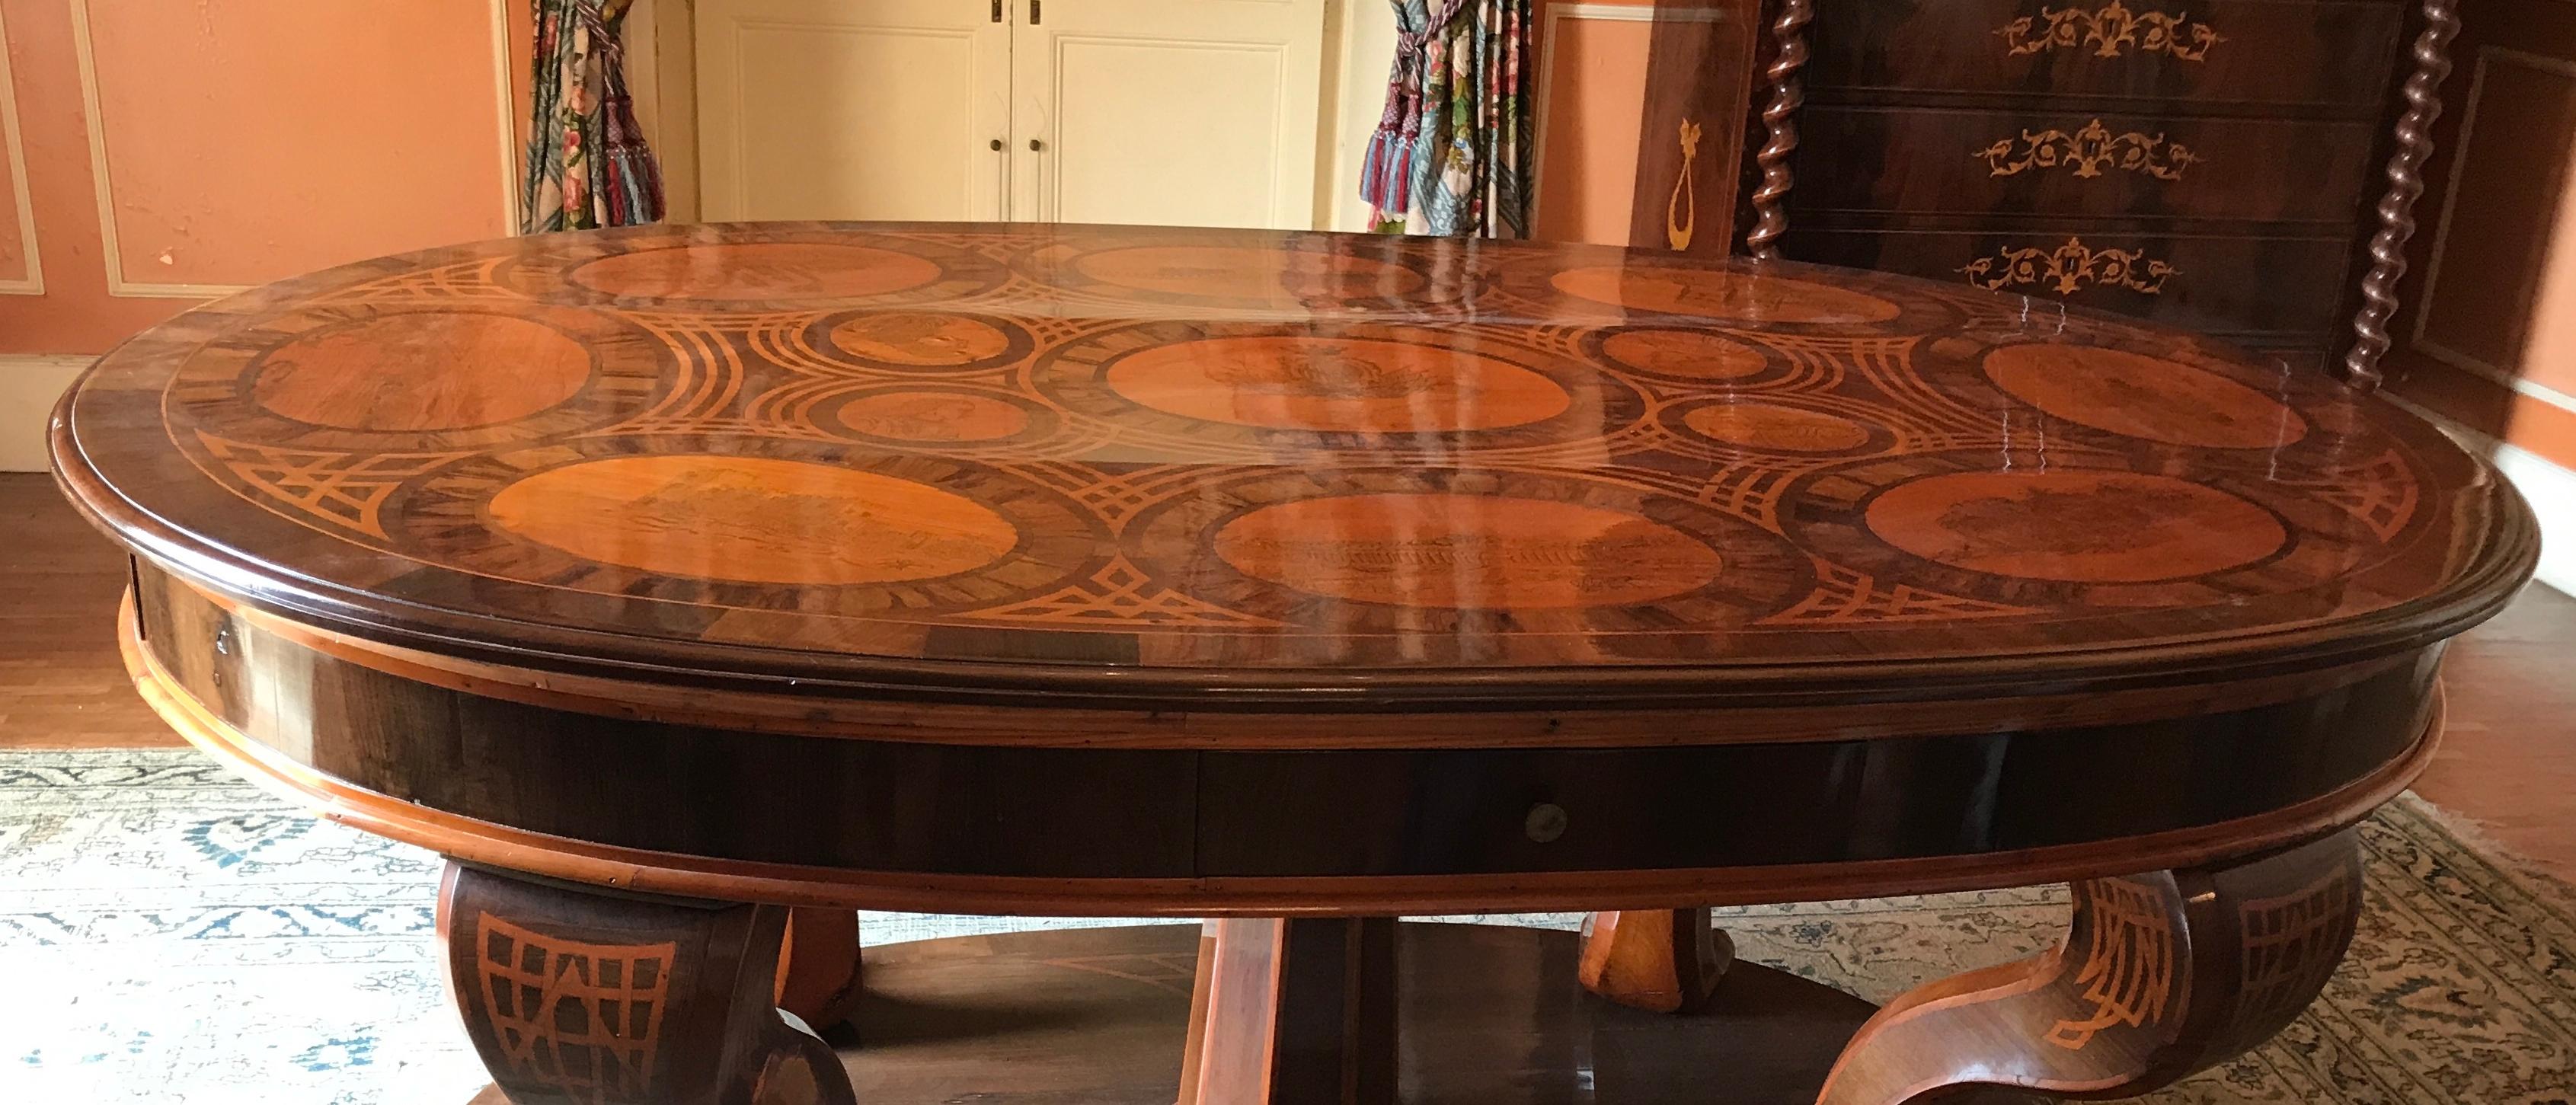 Historical Italian Oval Shaped Inlaid Center Table or Library Table 2